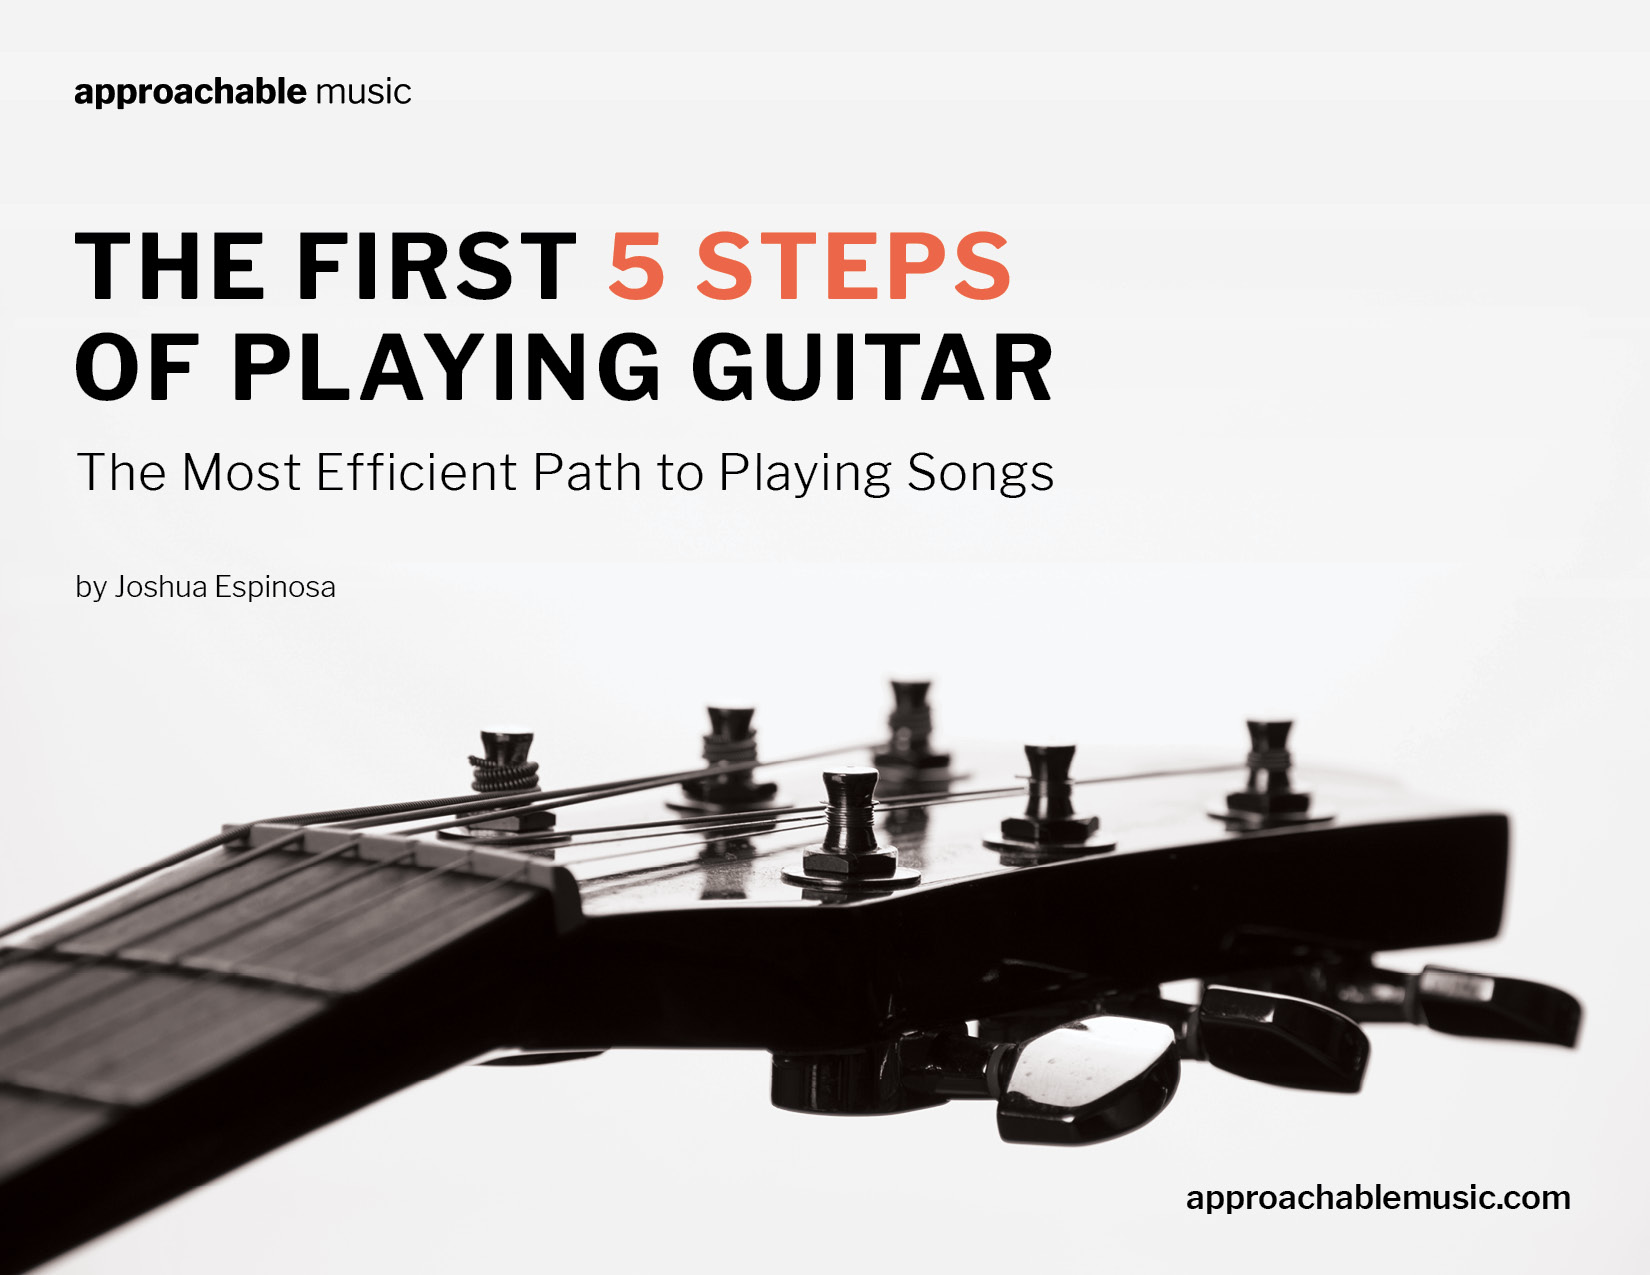 How to play guitar step by step